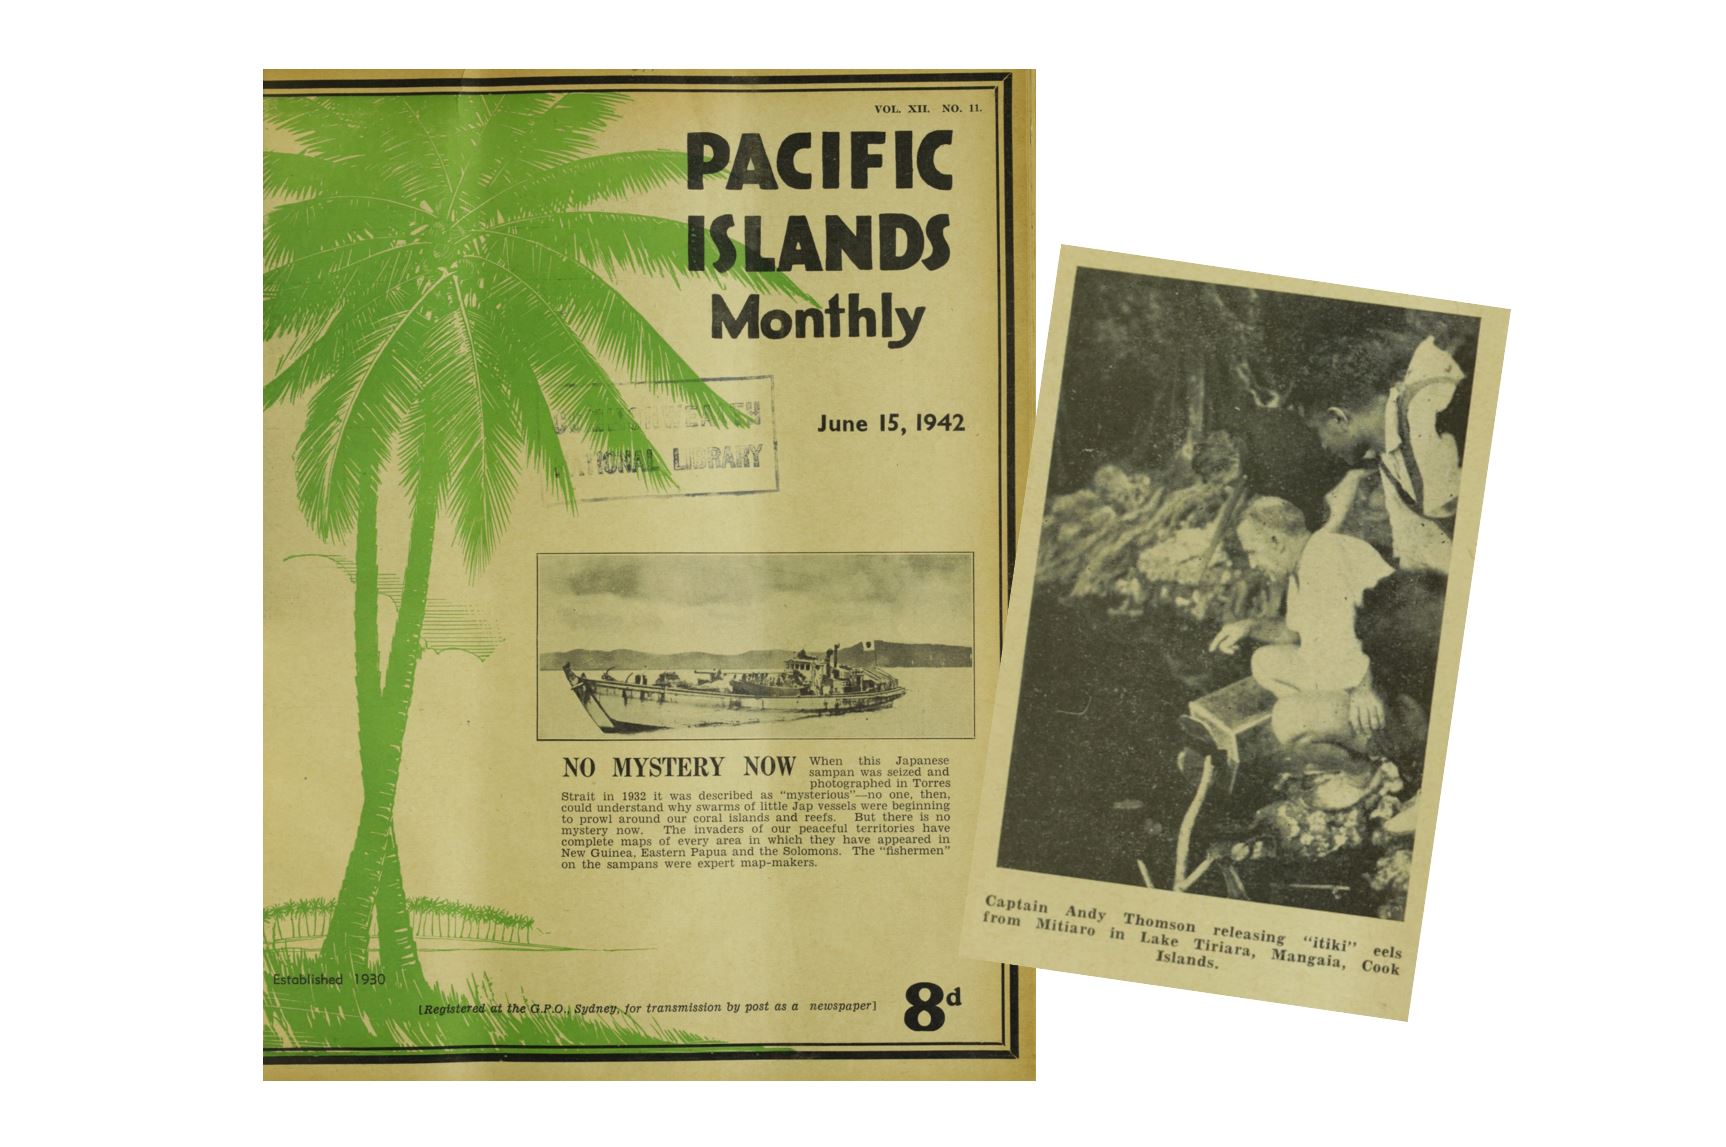 Cover of the Pacific Islands Monthly magazines June 15, 1942 and a photograph printed inside of Captain Andy Thomson